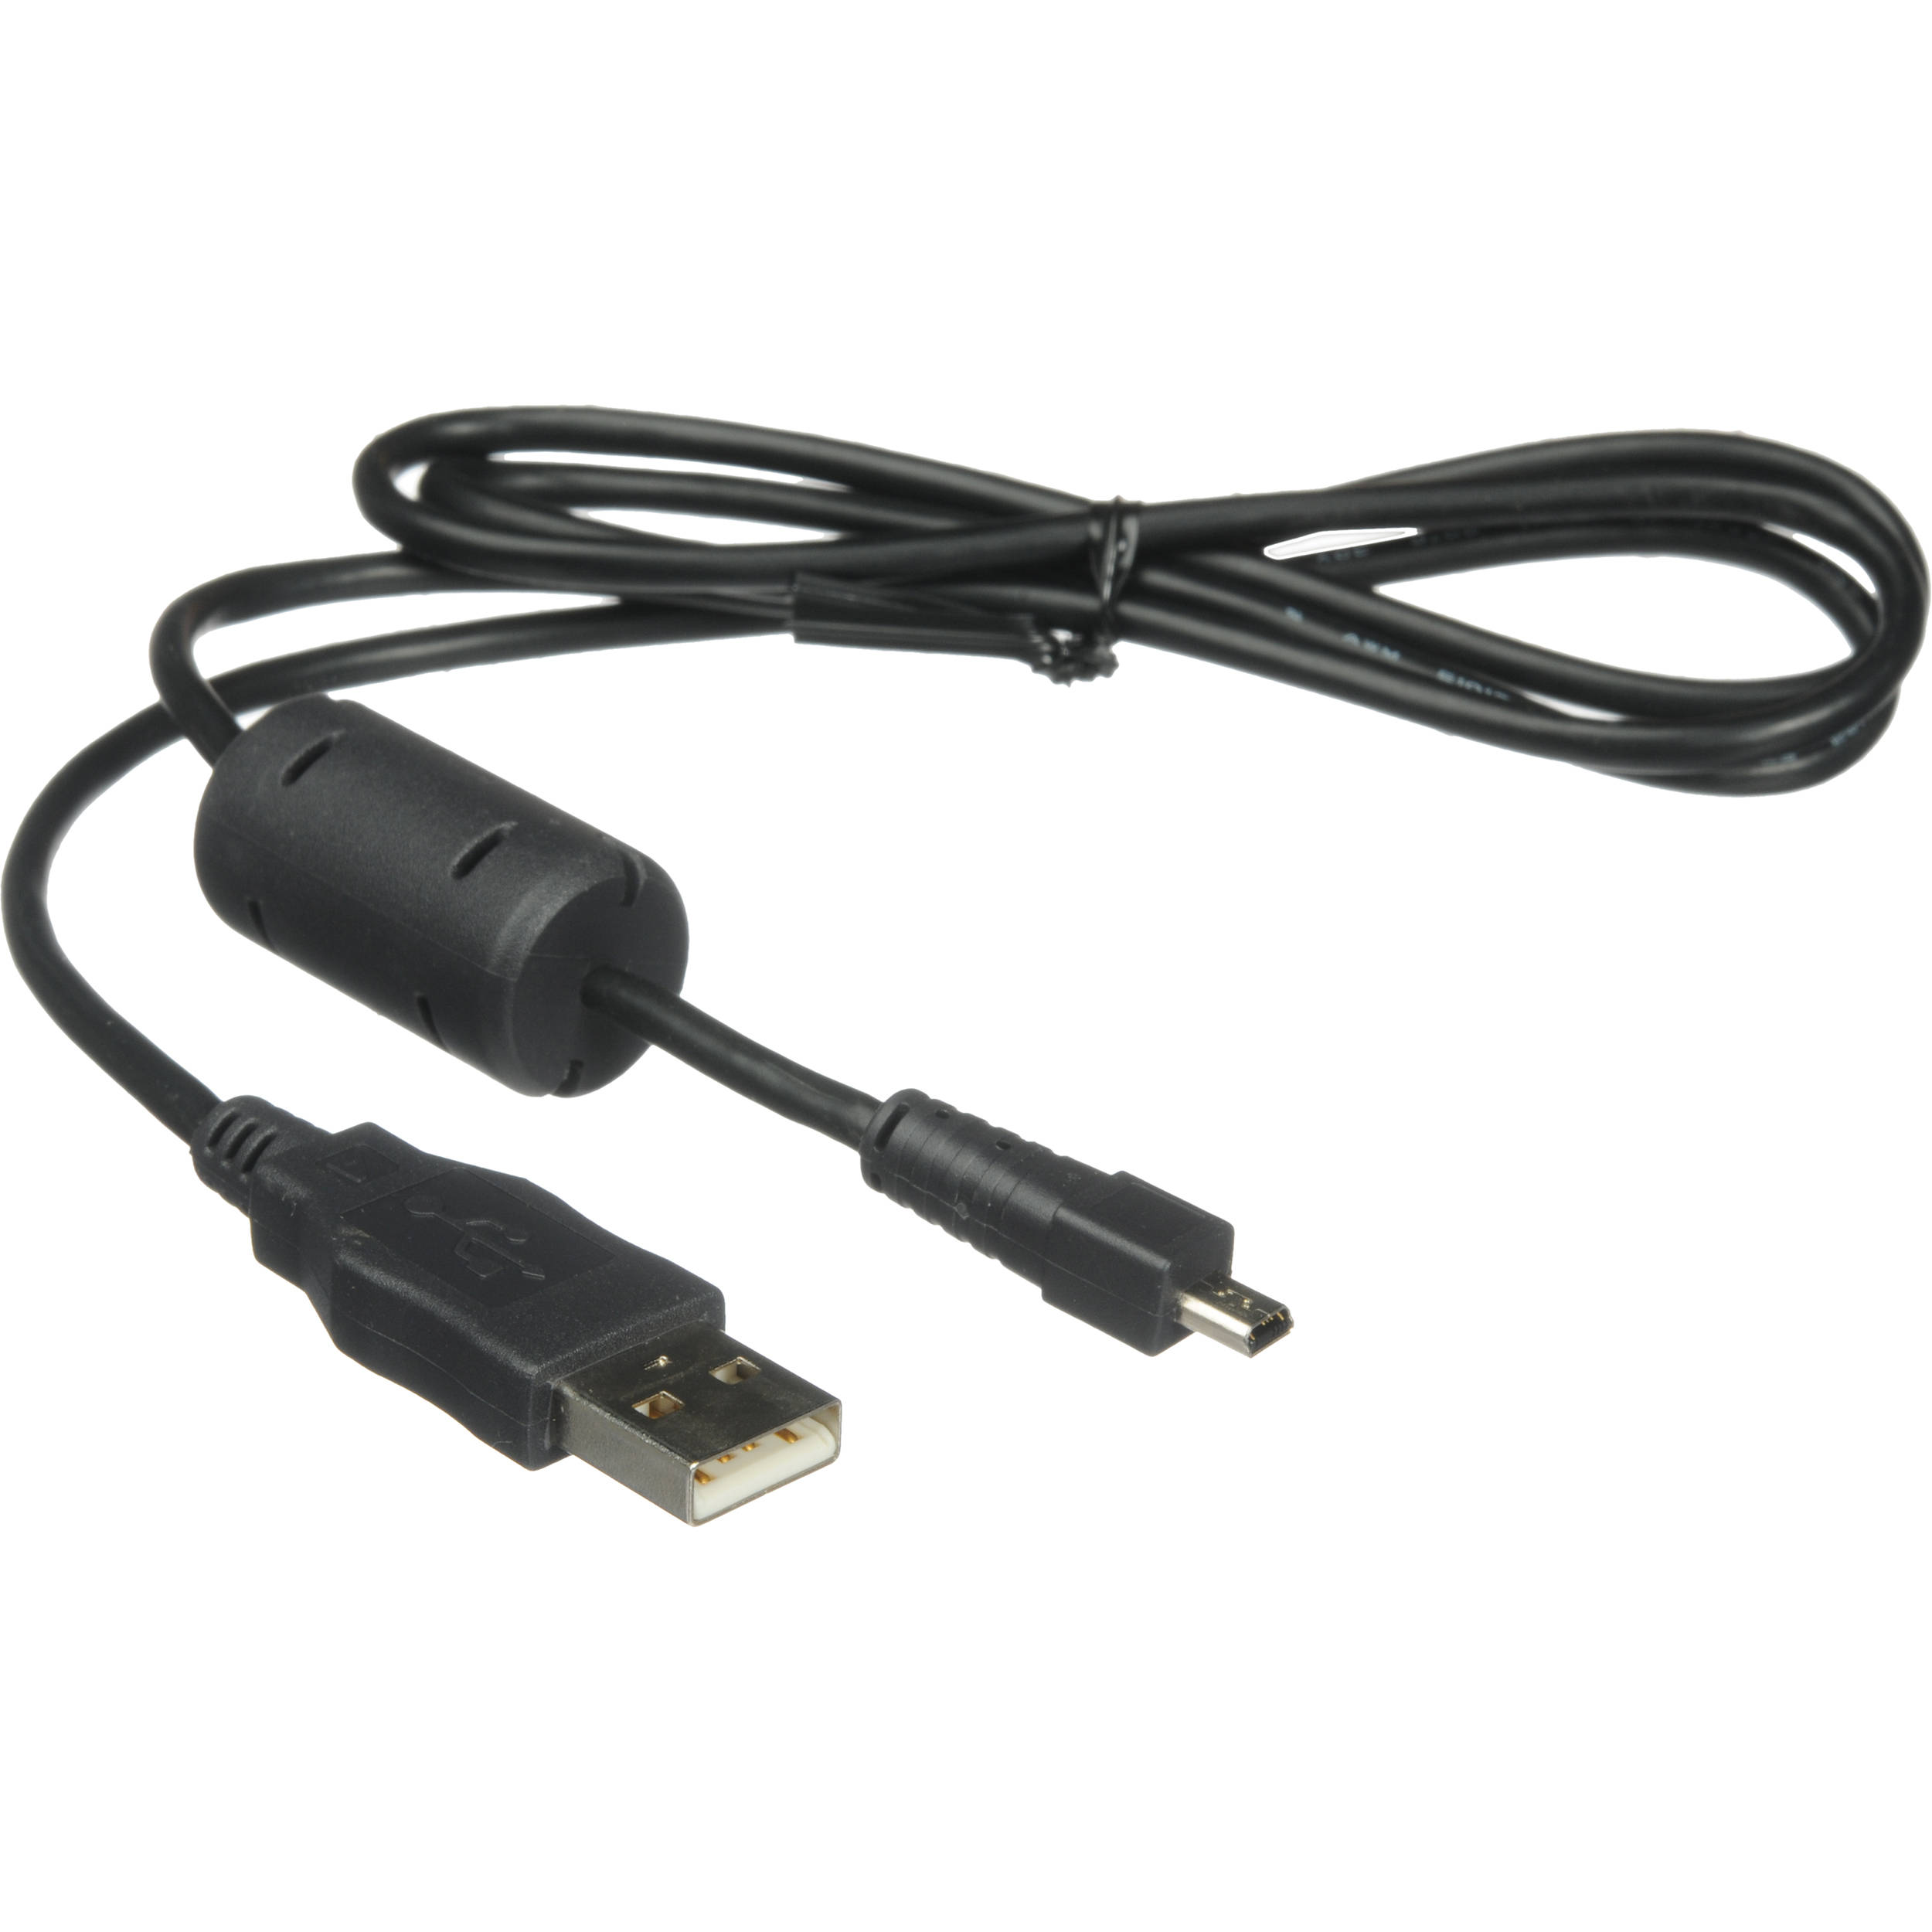 Leica USB Cable for D-Lux 2 / 3 / 4 and C-Lux 1 423-114-001-010